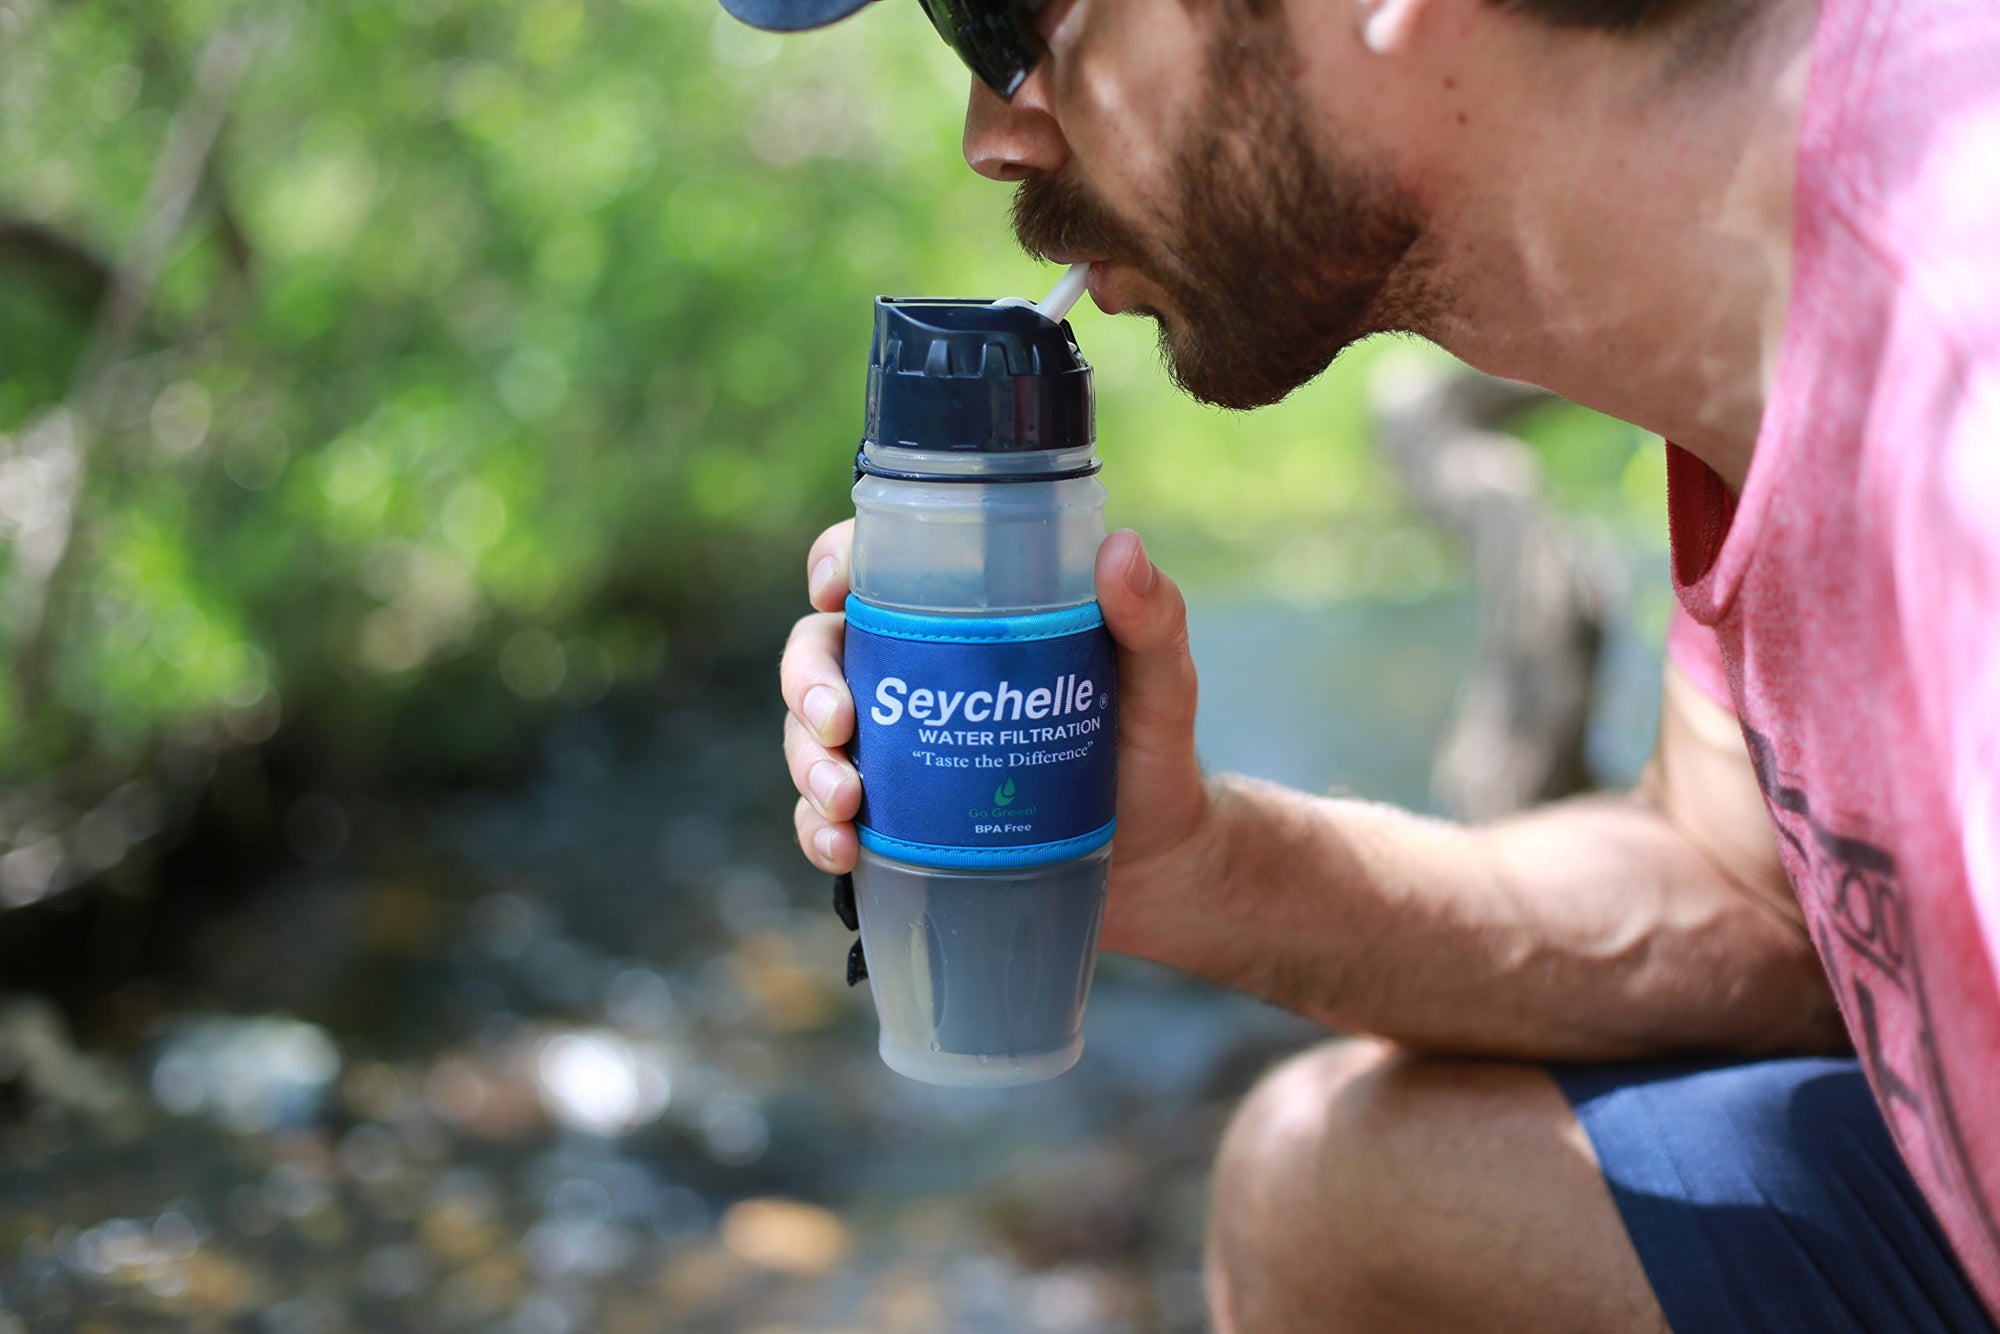 Seychelle Extreme Water Filter Bottle - Camping, Travel, Hiking, Backpacking, Survival and Emergency - Removes Bacteria, Viruses, Radiological Contaminants - 28 oz